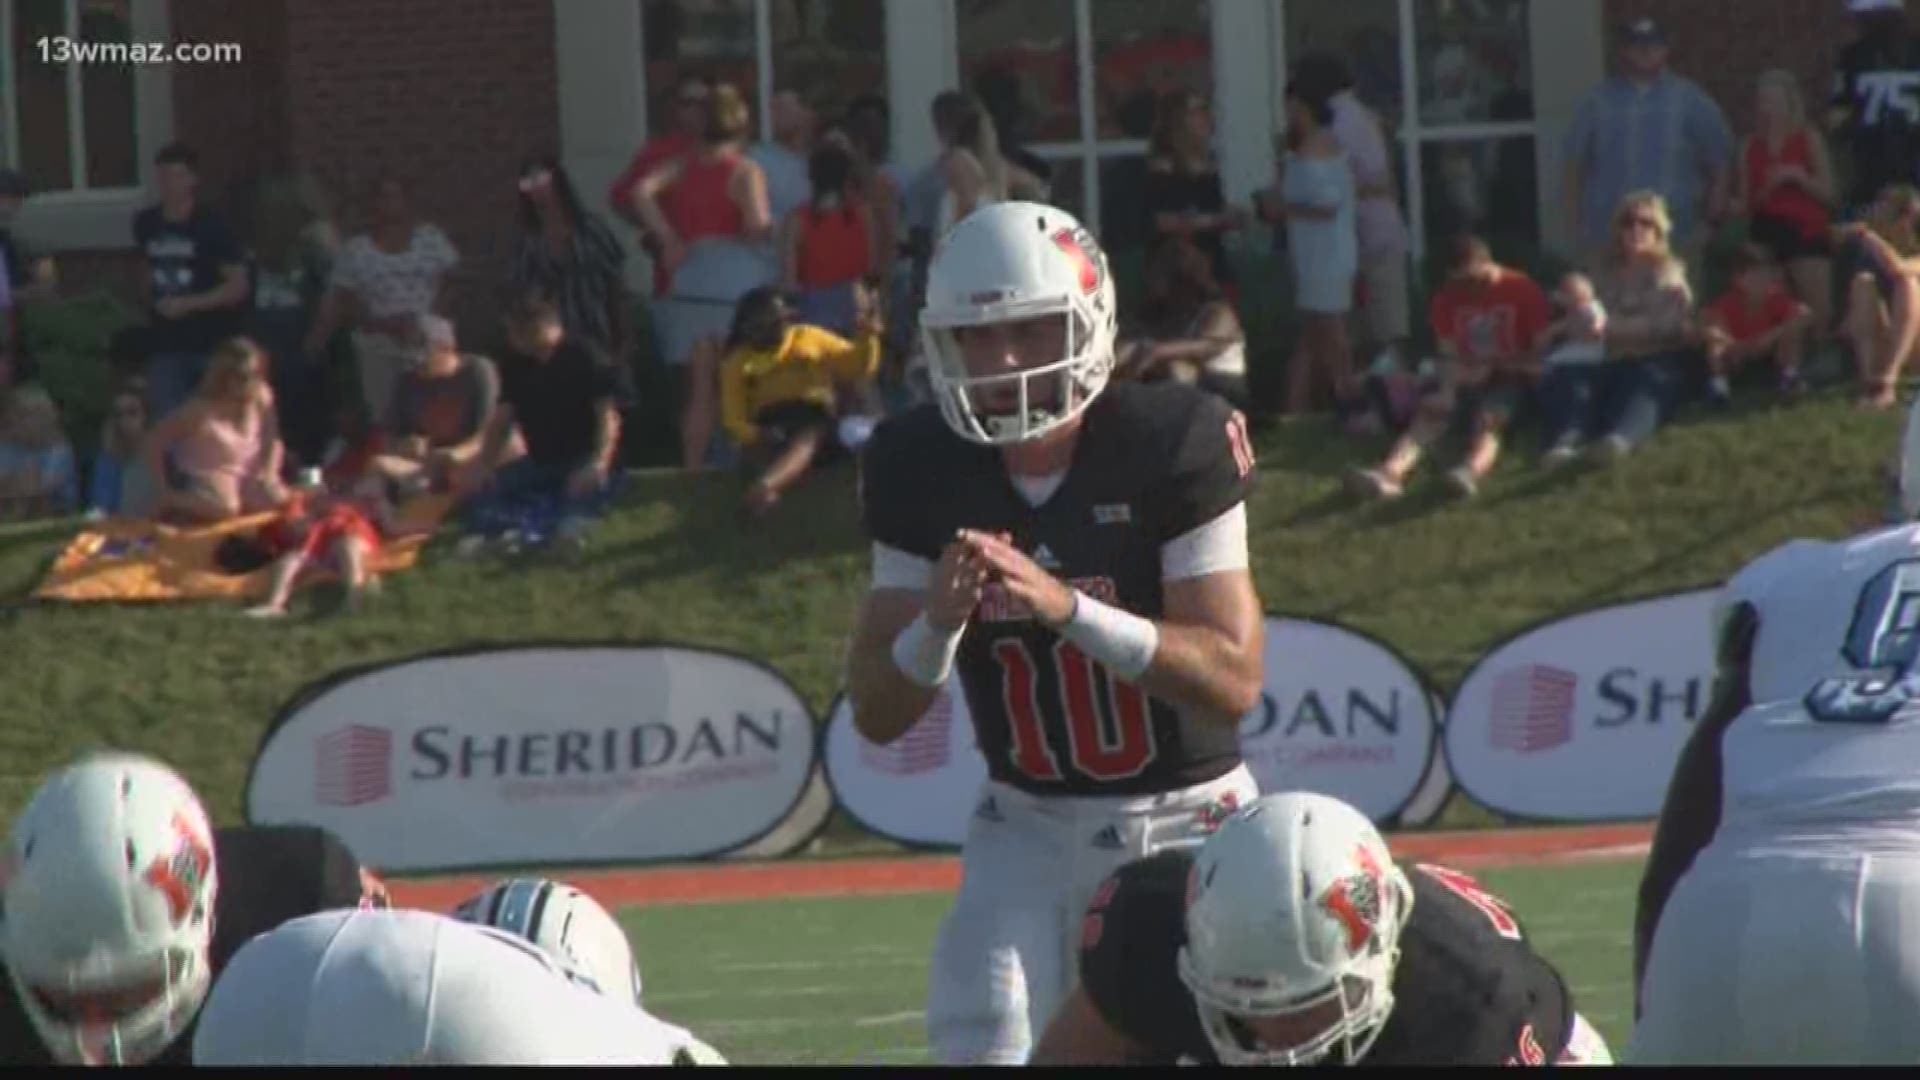 Mercer University battled with several injuries to key players during their 2018 season.